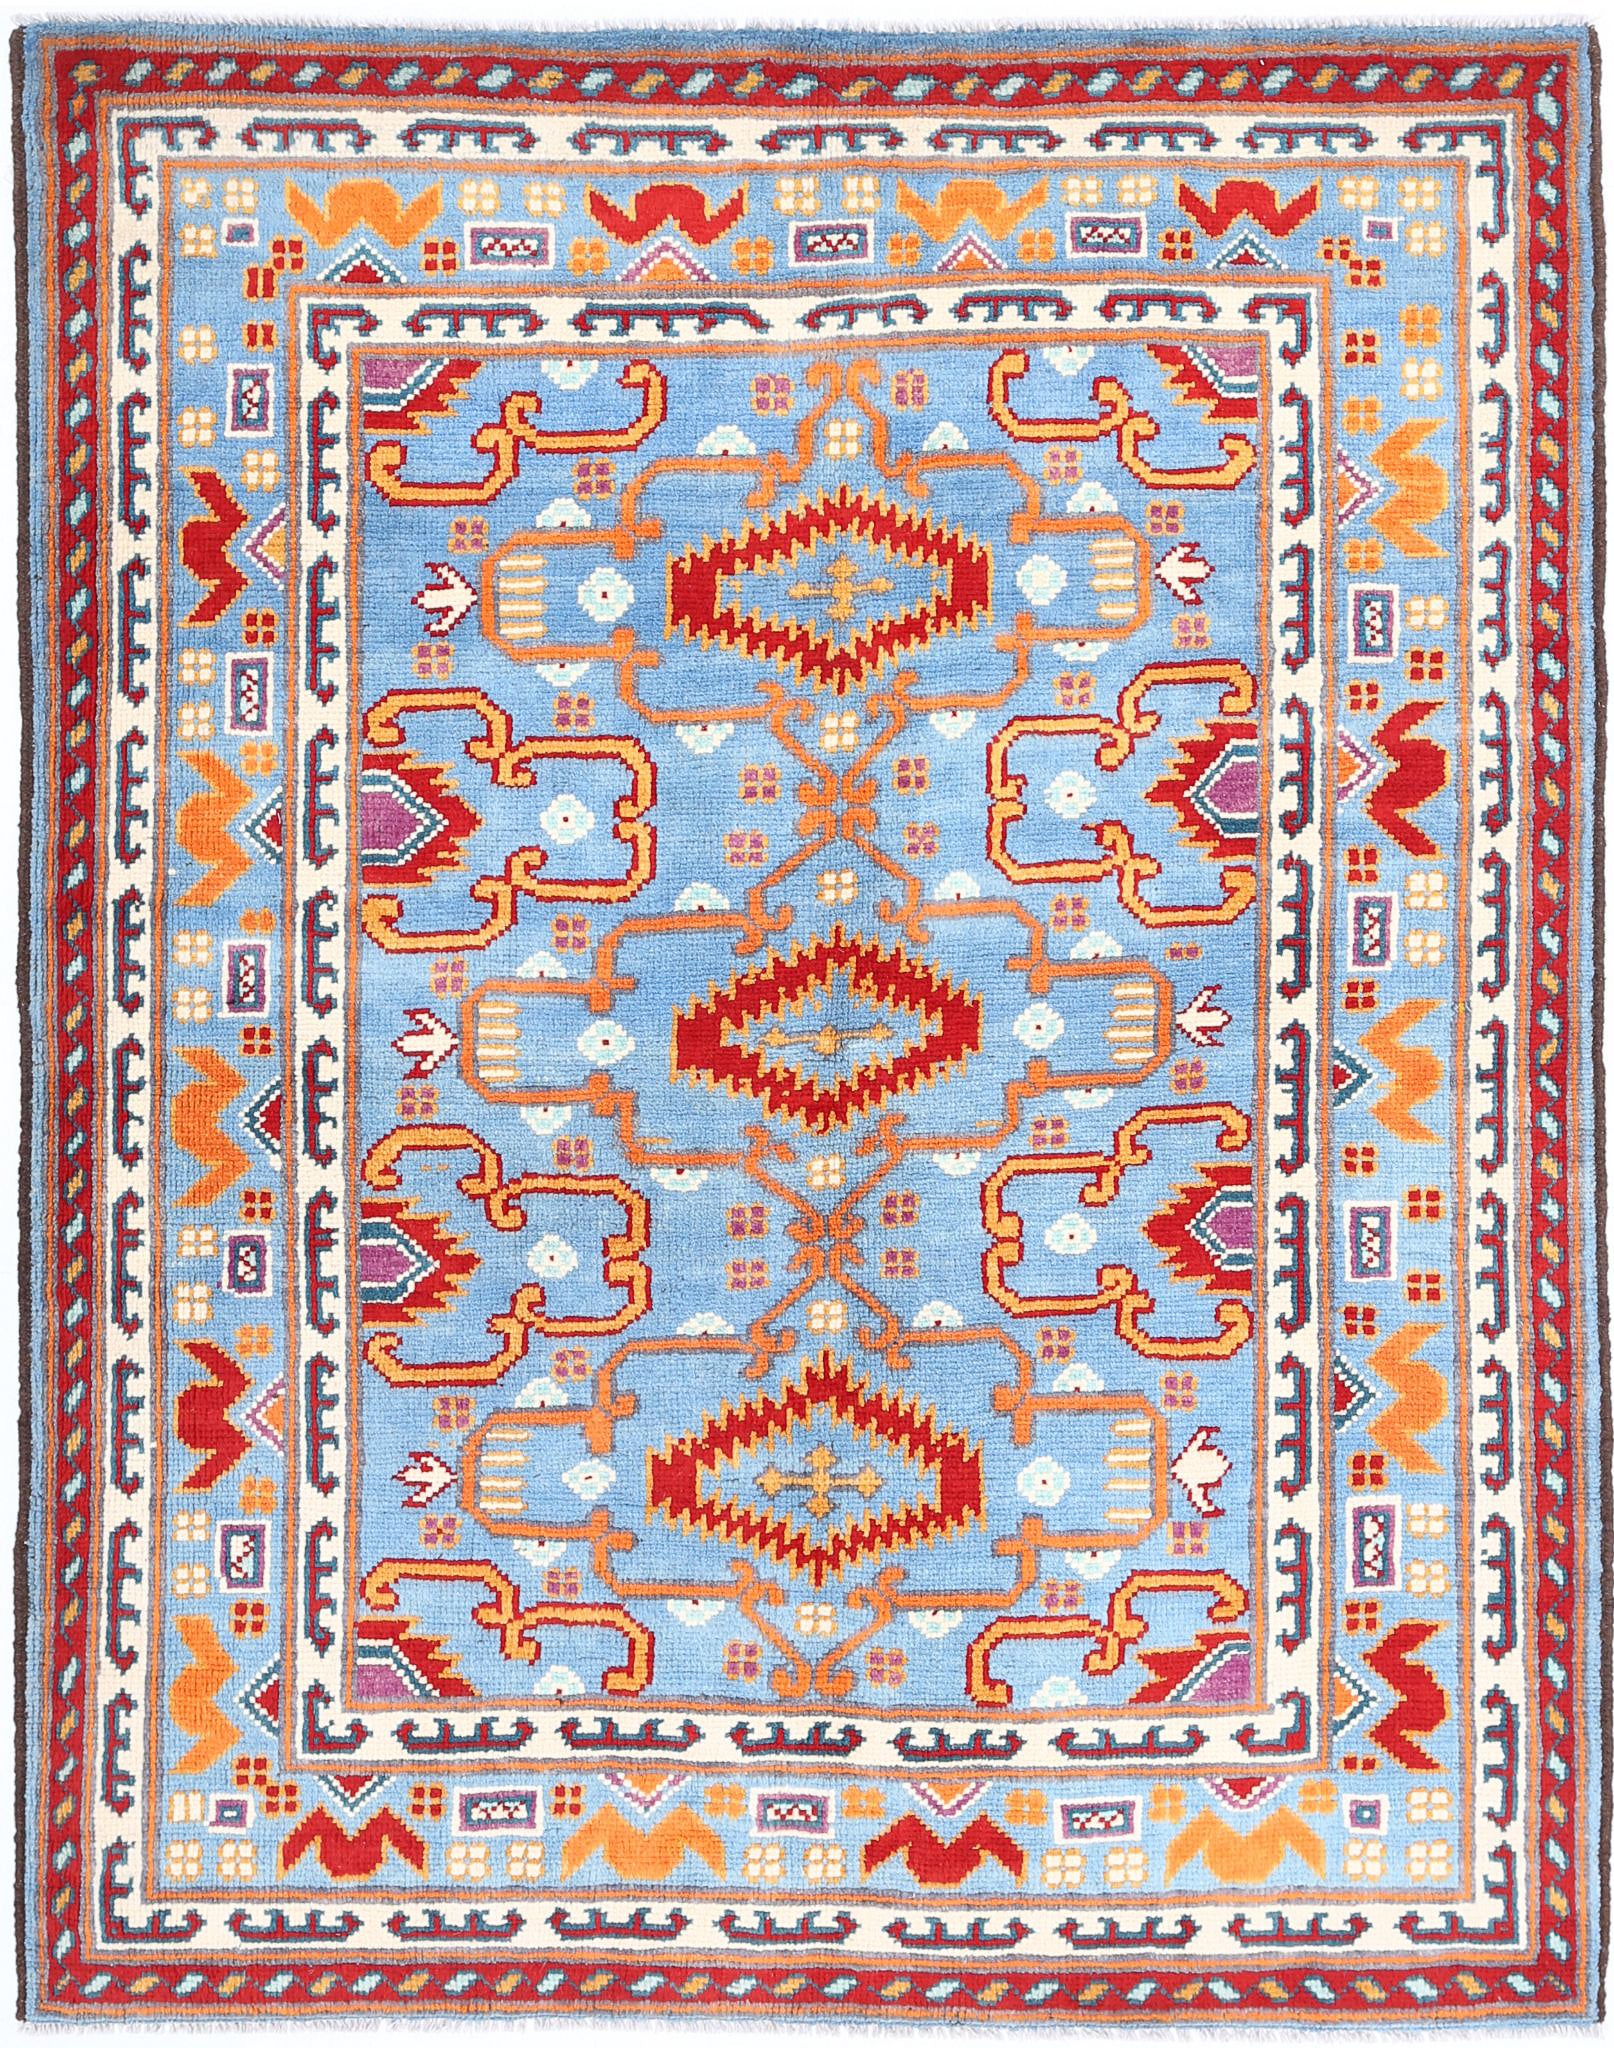 Revival-hand-knotted-qarghani-wool-rug-5014067.jpg